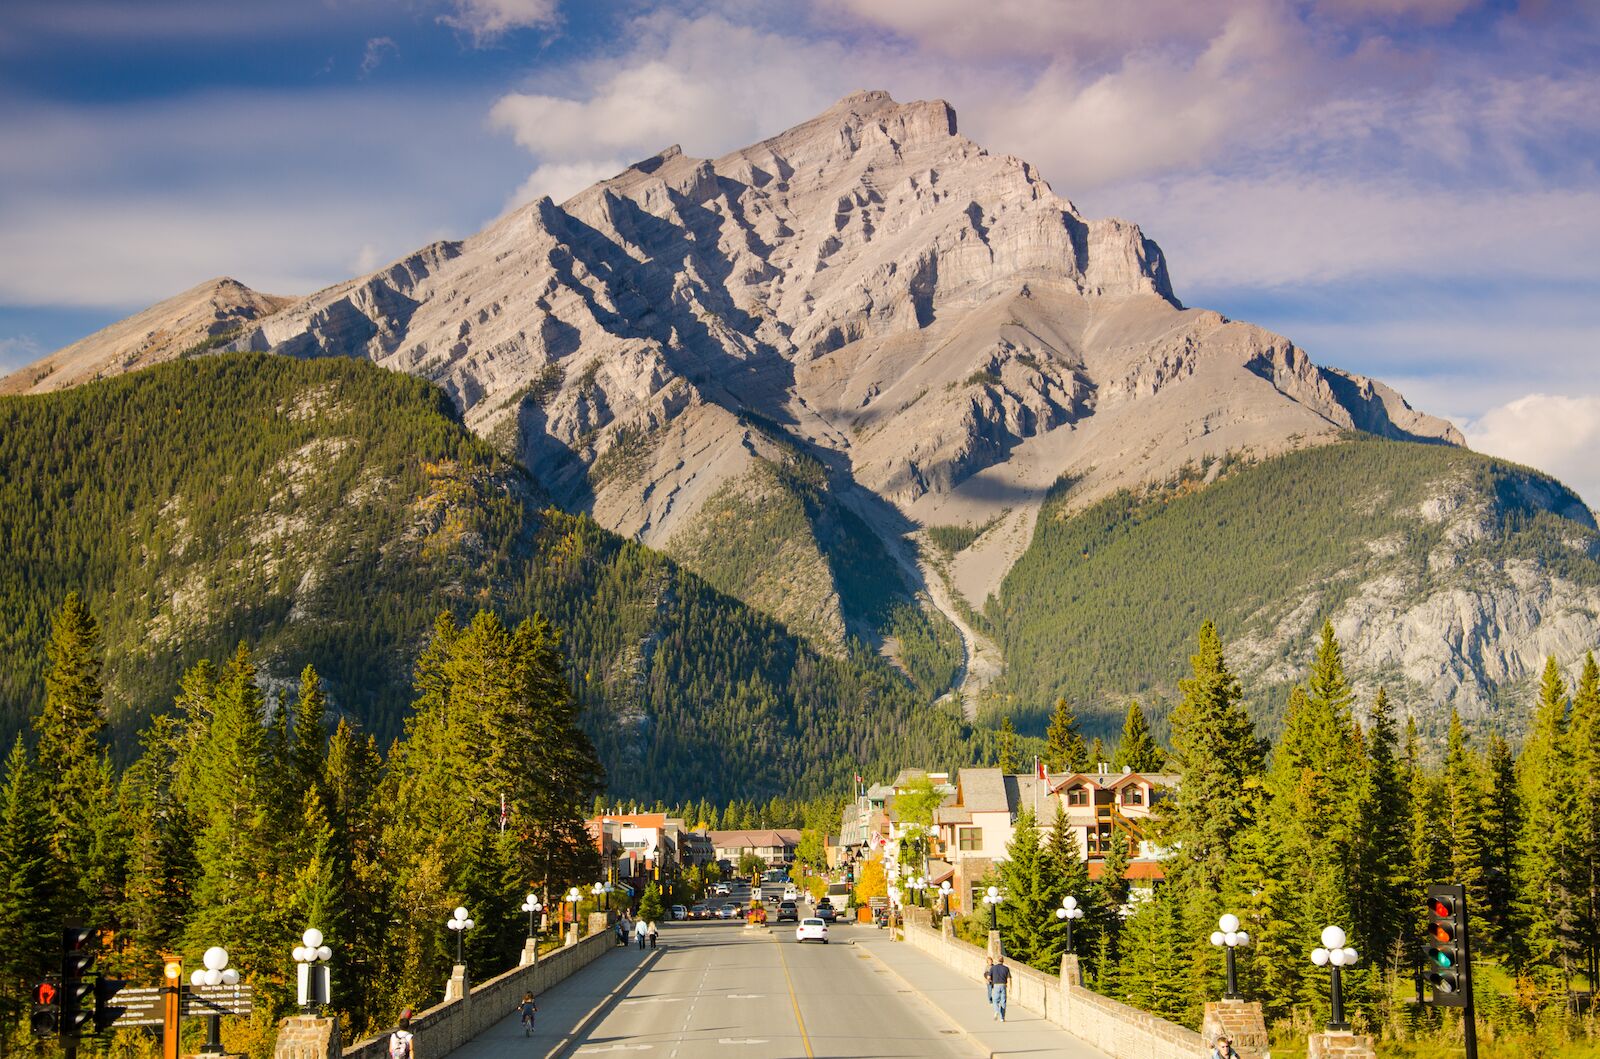 View over the town of Banff in Alberta, Canada. Banff is one of the most famous and most scenic Canadian small towns.